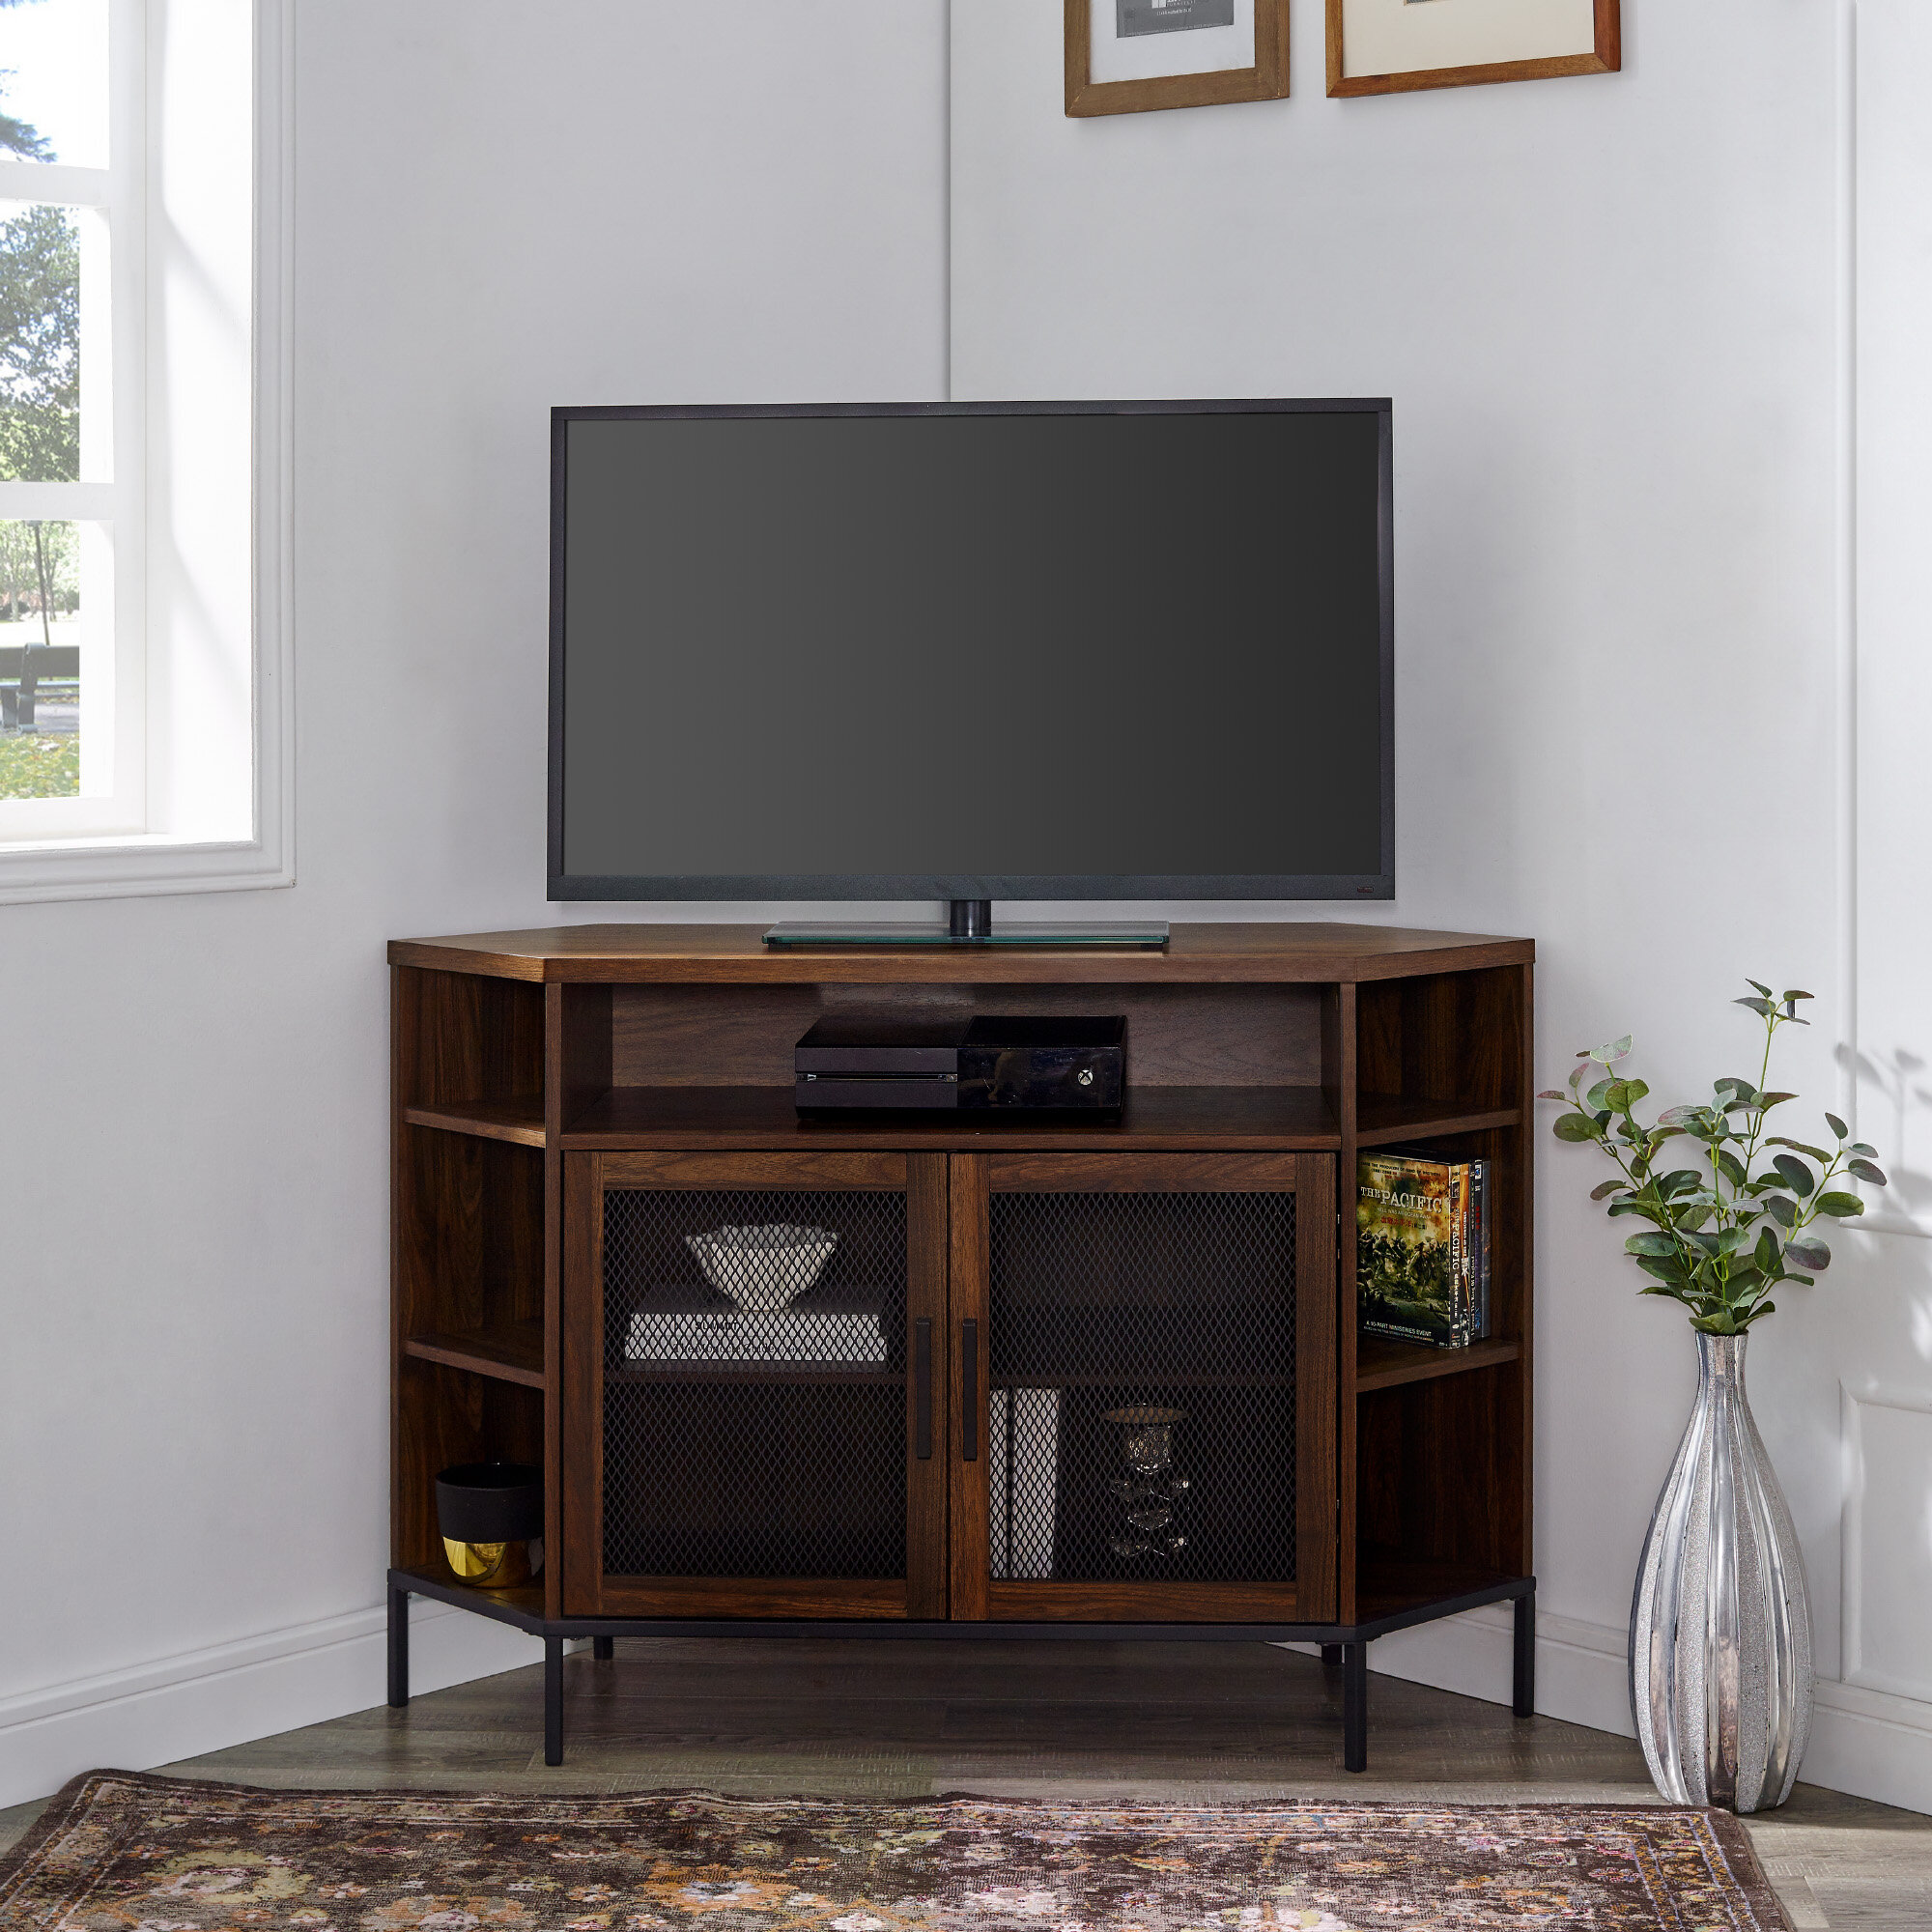 Dominick Corner Tv Stand For Tvs Up To 50 Reviews Birch Lane